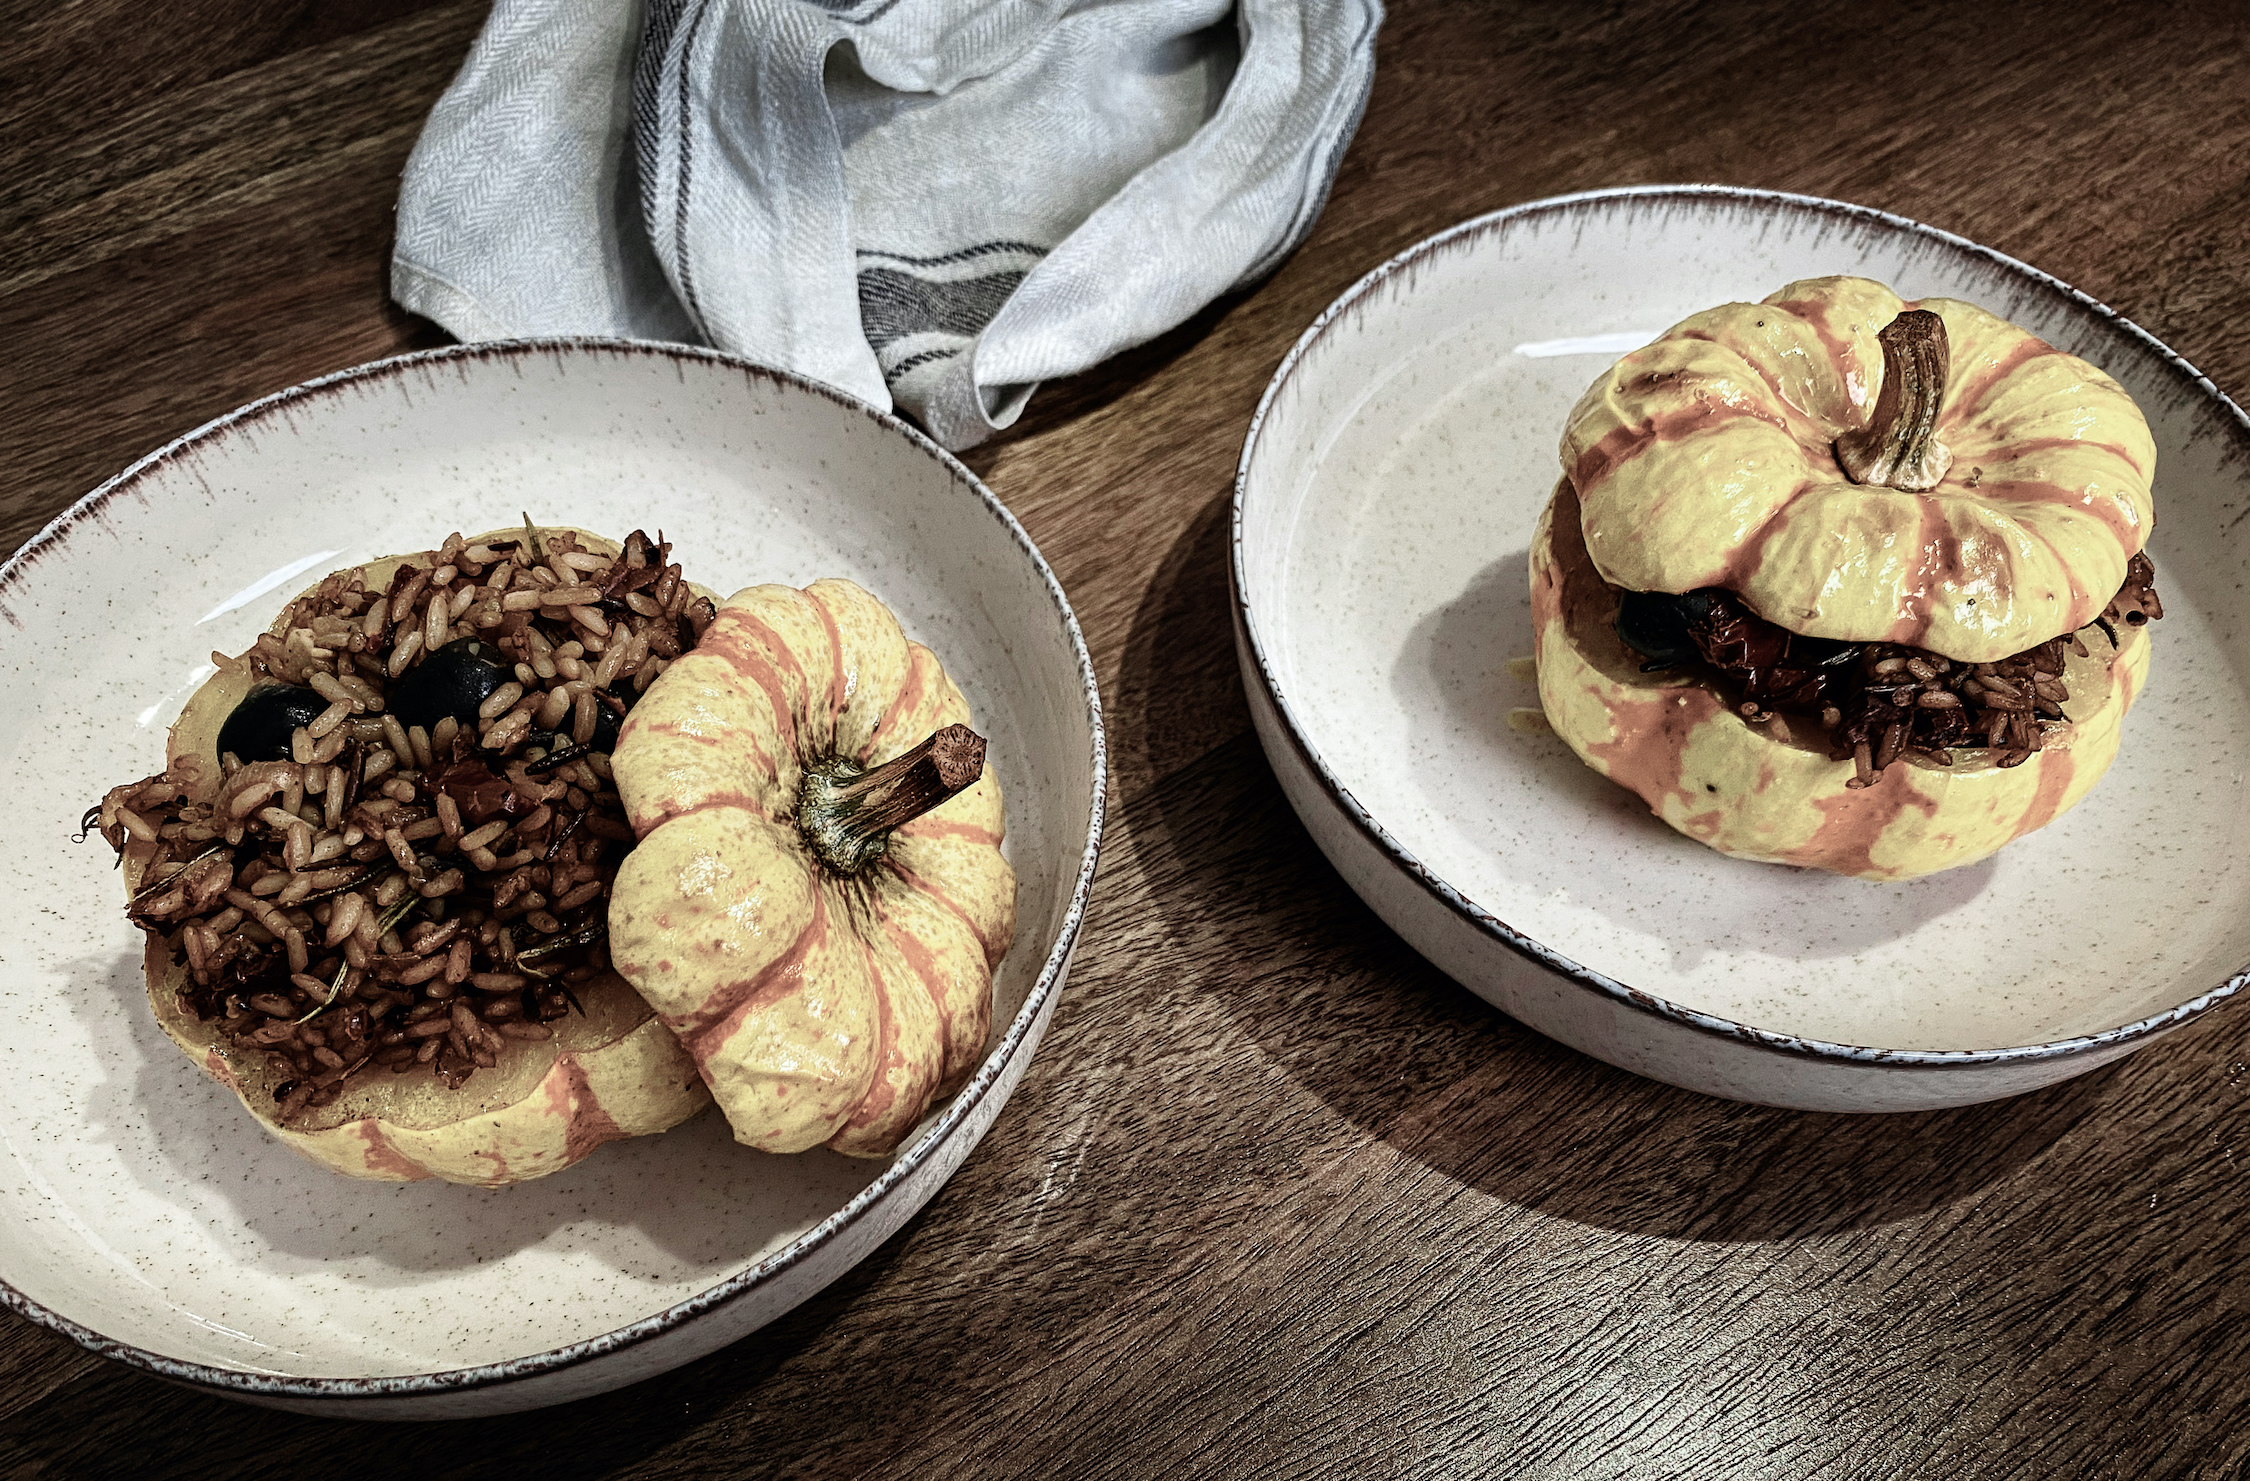 Roasted baby pumpkins – cute little edible bowls, full of rich flavours